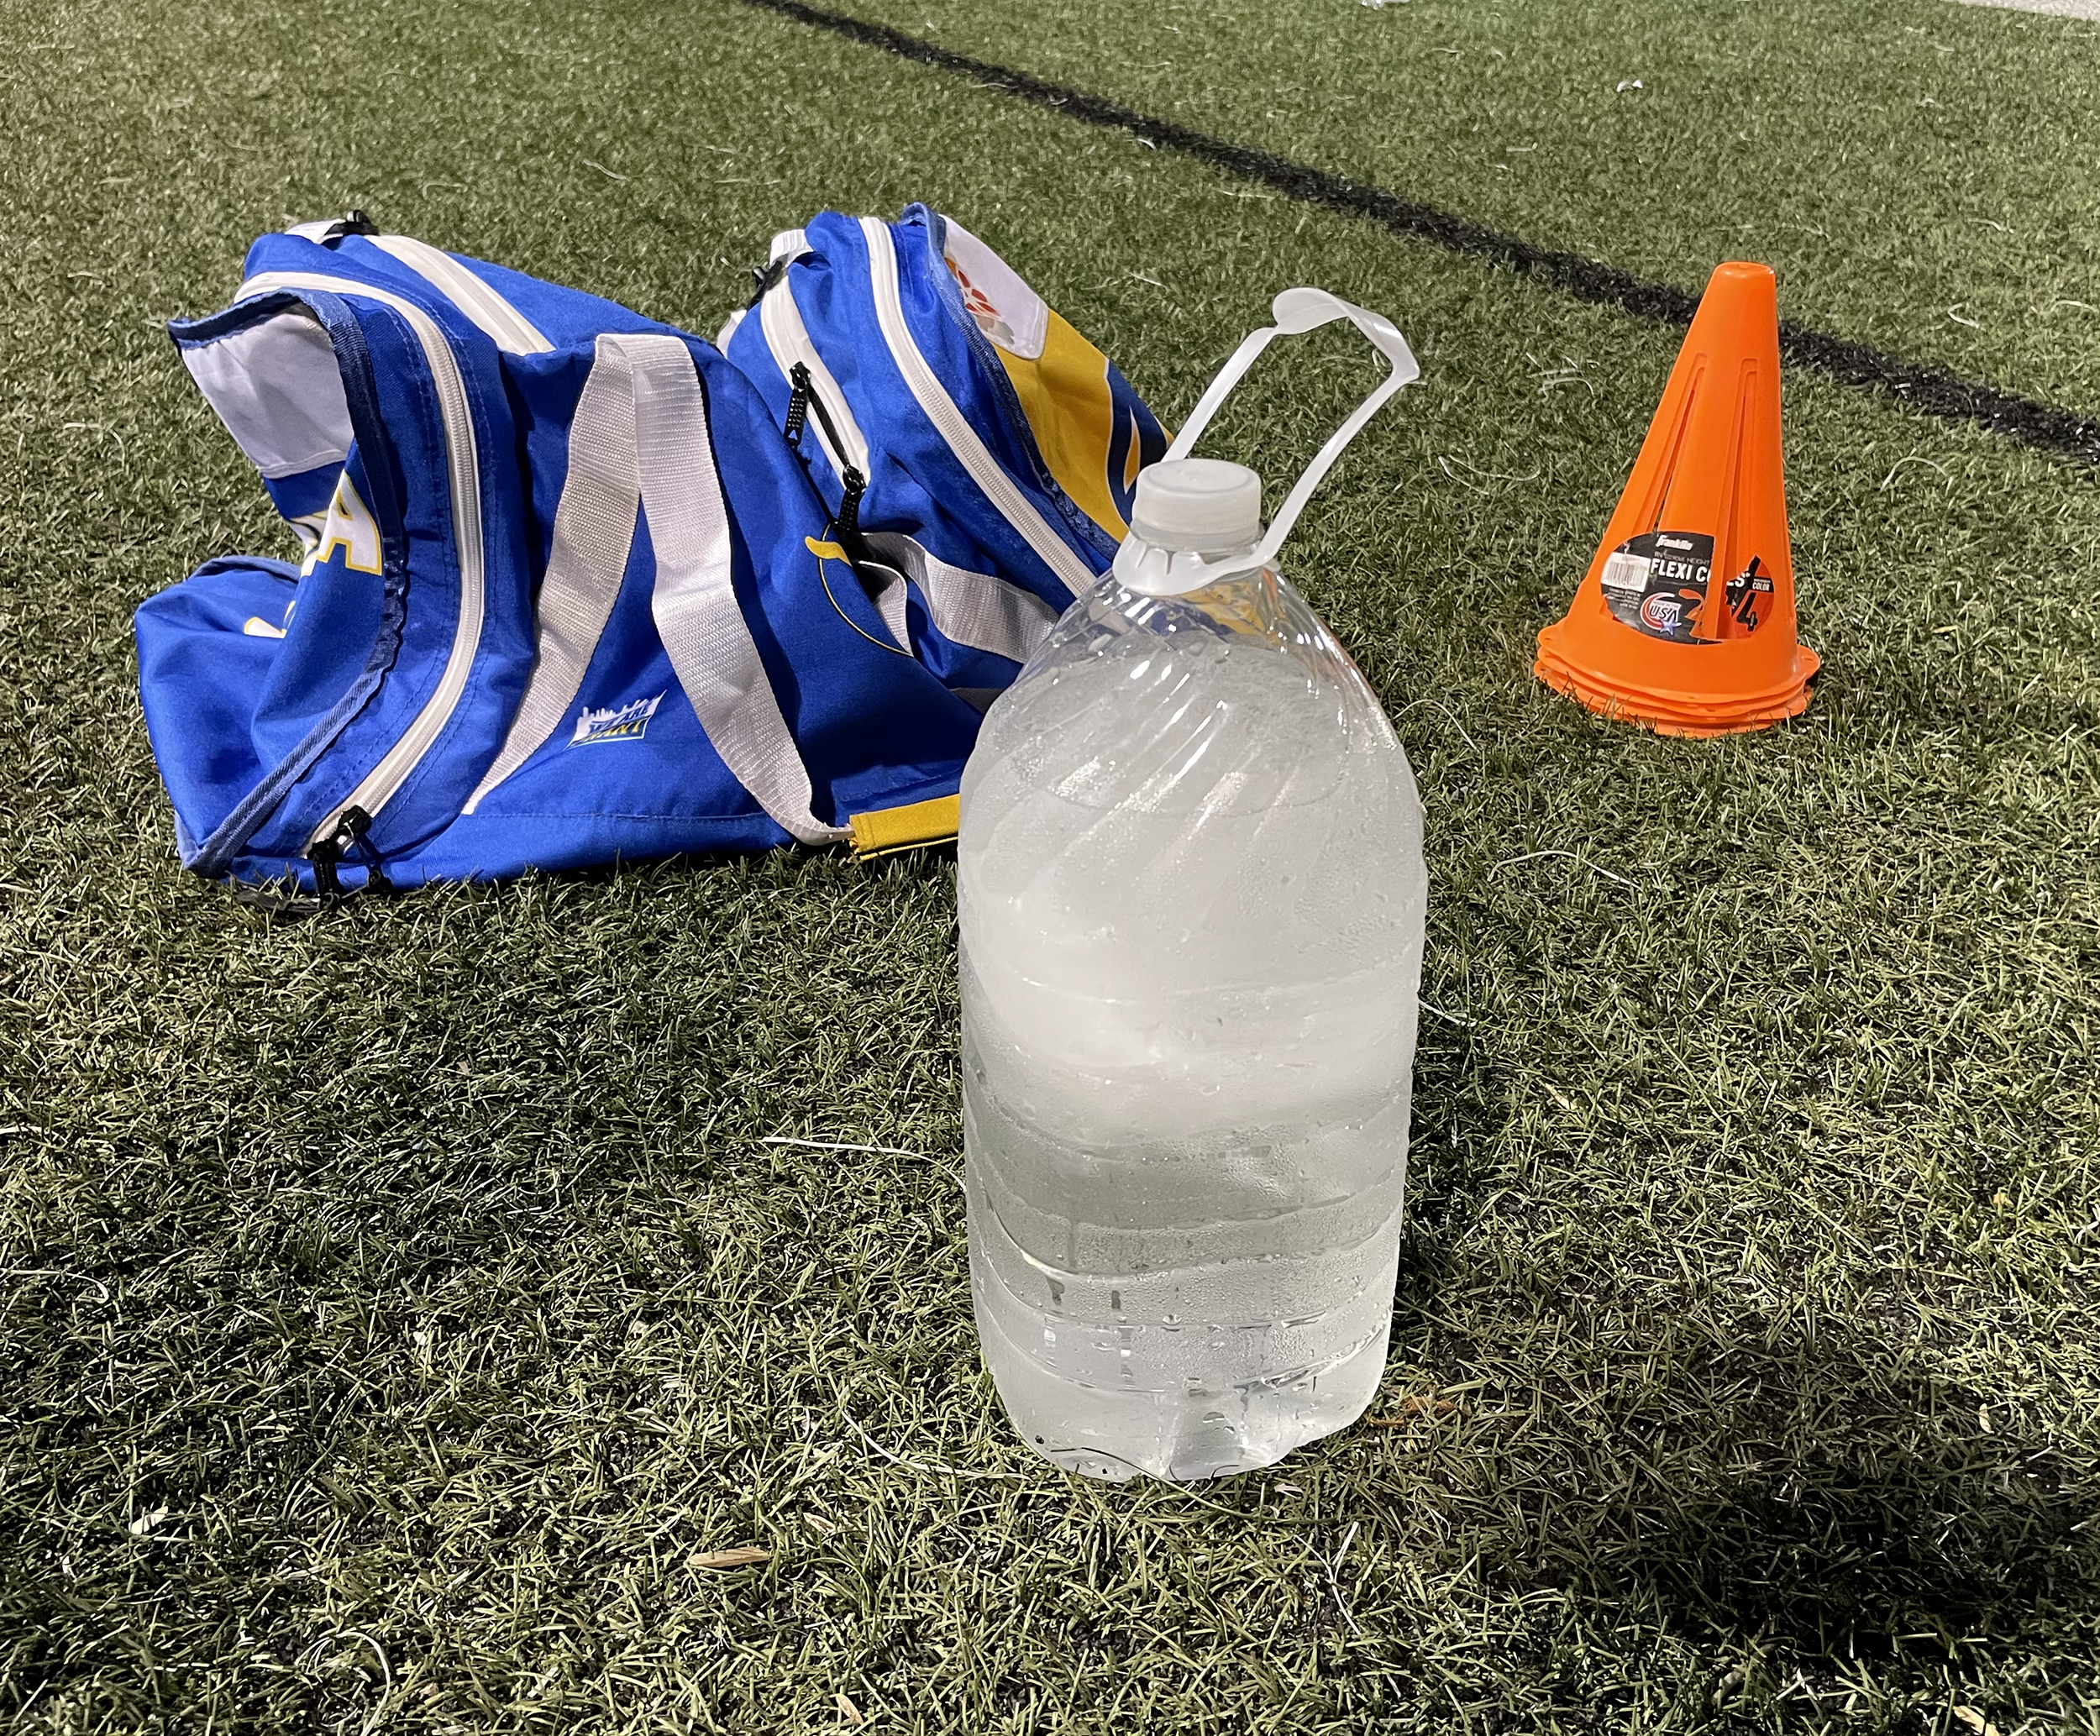 A large water bottle sits on the grass of the football field near a gym bag and orange cones.